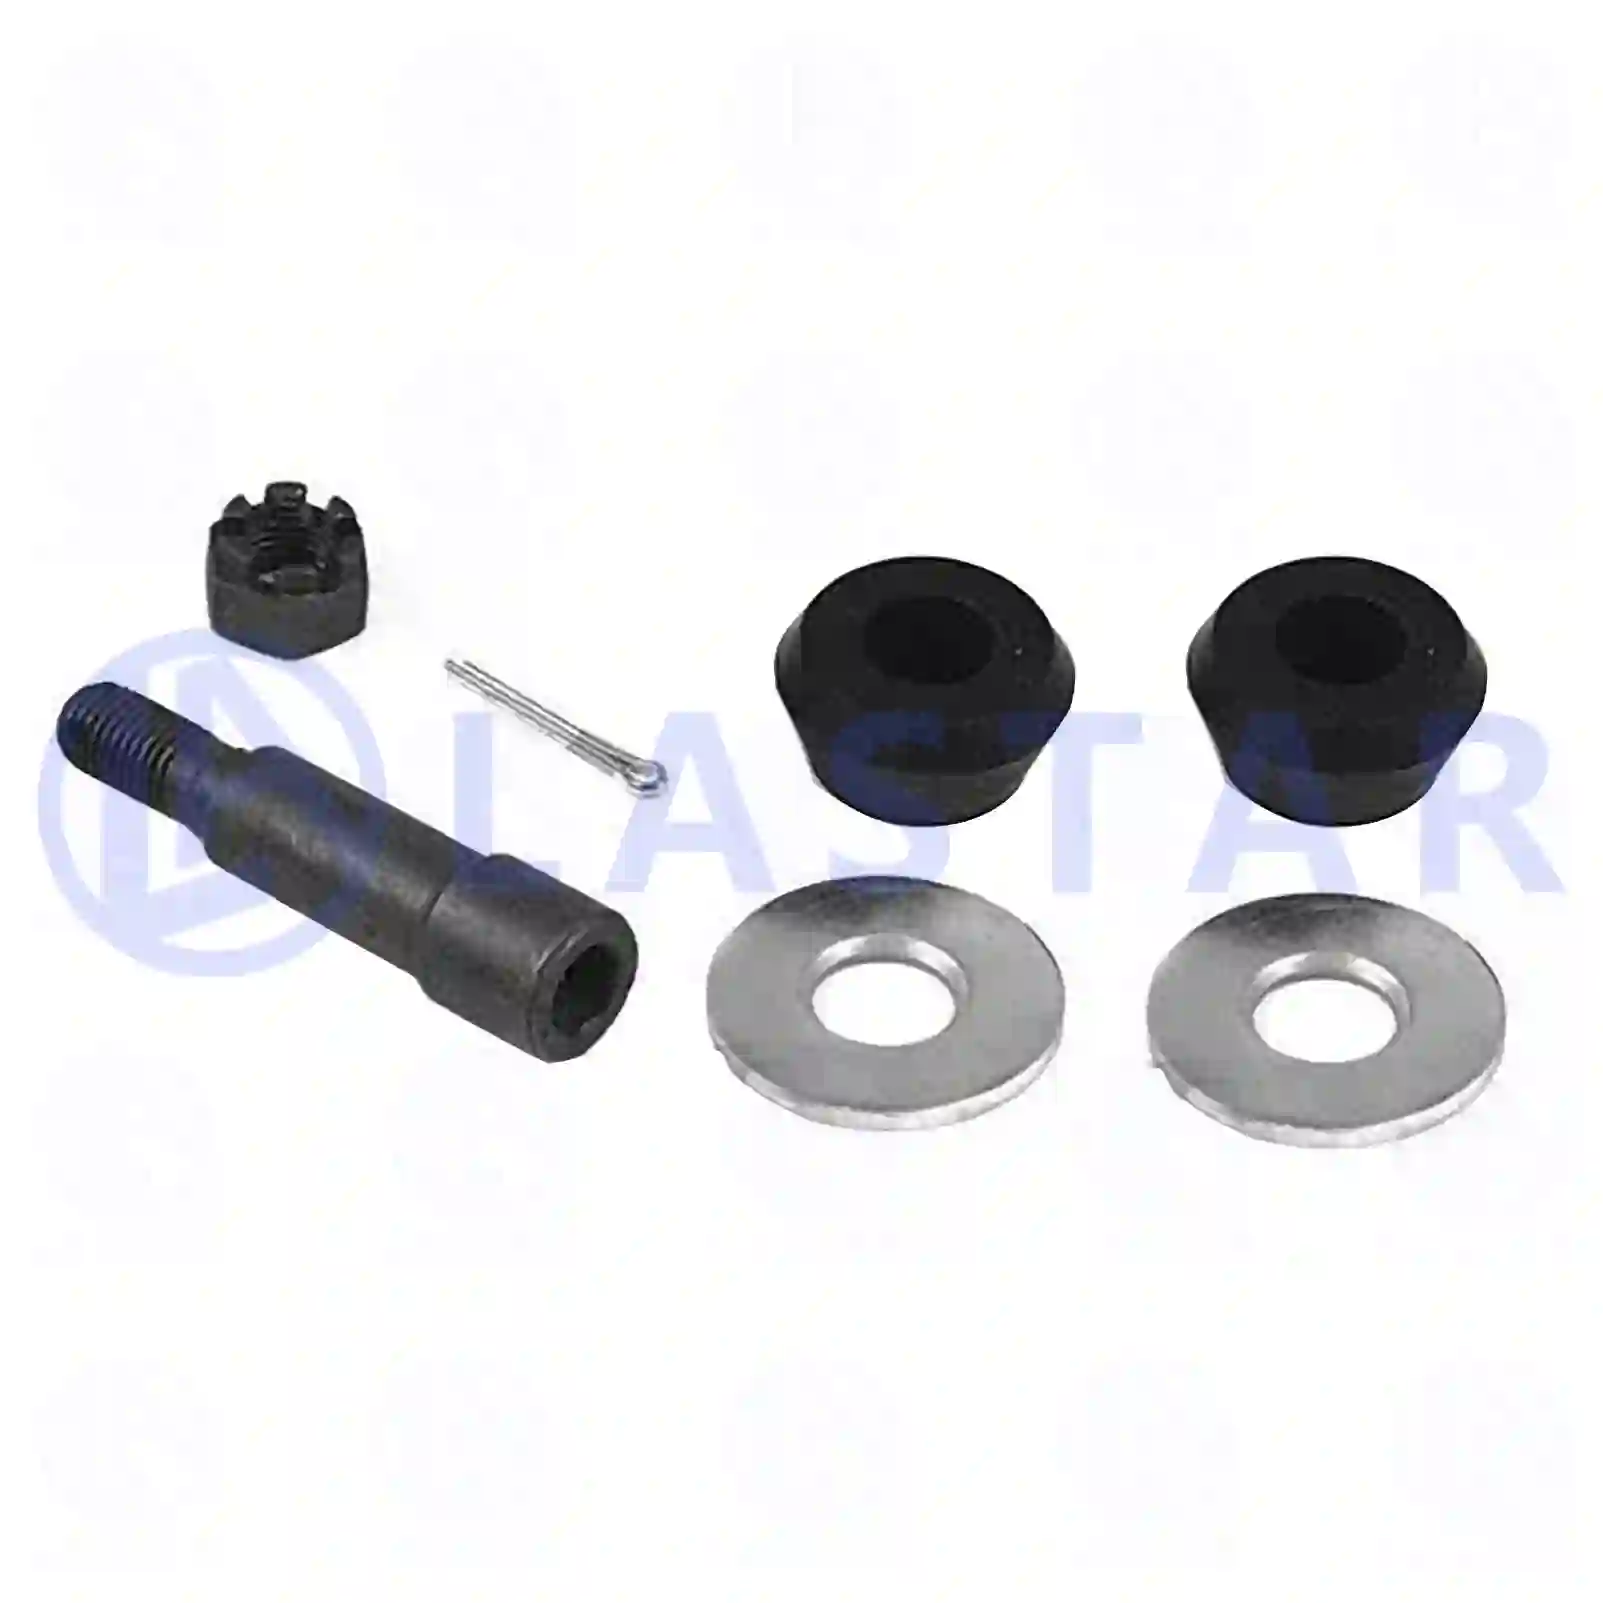 Mounting kit, 77730185, 177655S, 1880379S, ZG41305-0008 ||  77730185 Lastar Spare Part | Truck Spare Parts, Auotomotive Spare Parts Mounting kit, 77730185, 177655S, 1880379S, ZG41305-0008 ||  77730185 Lastar Spare Part | Truck Spare Parts, Auotomotive Spare Parts